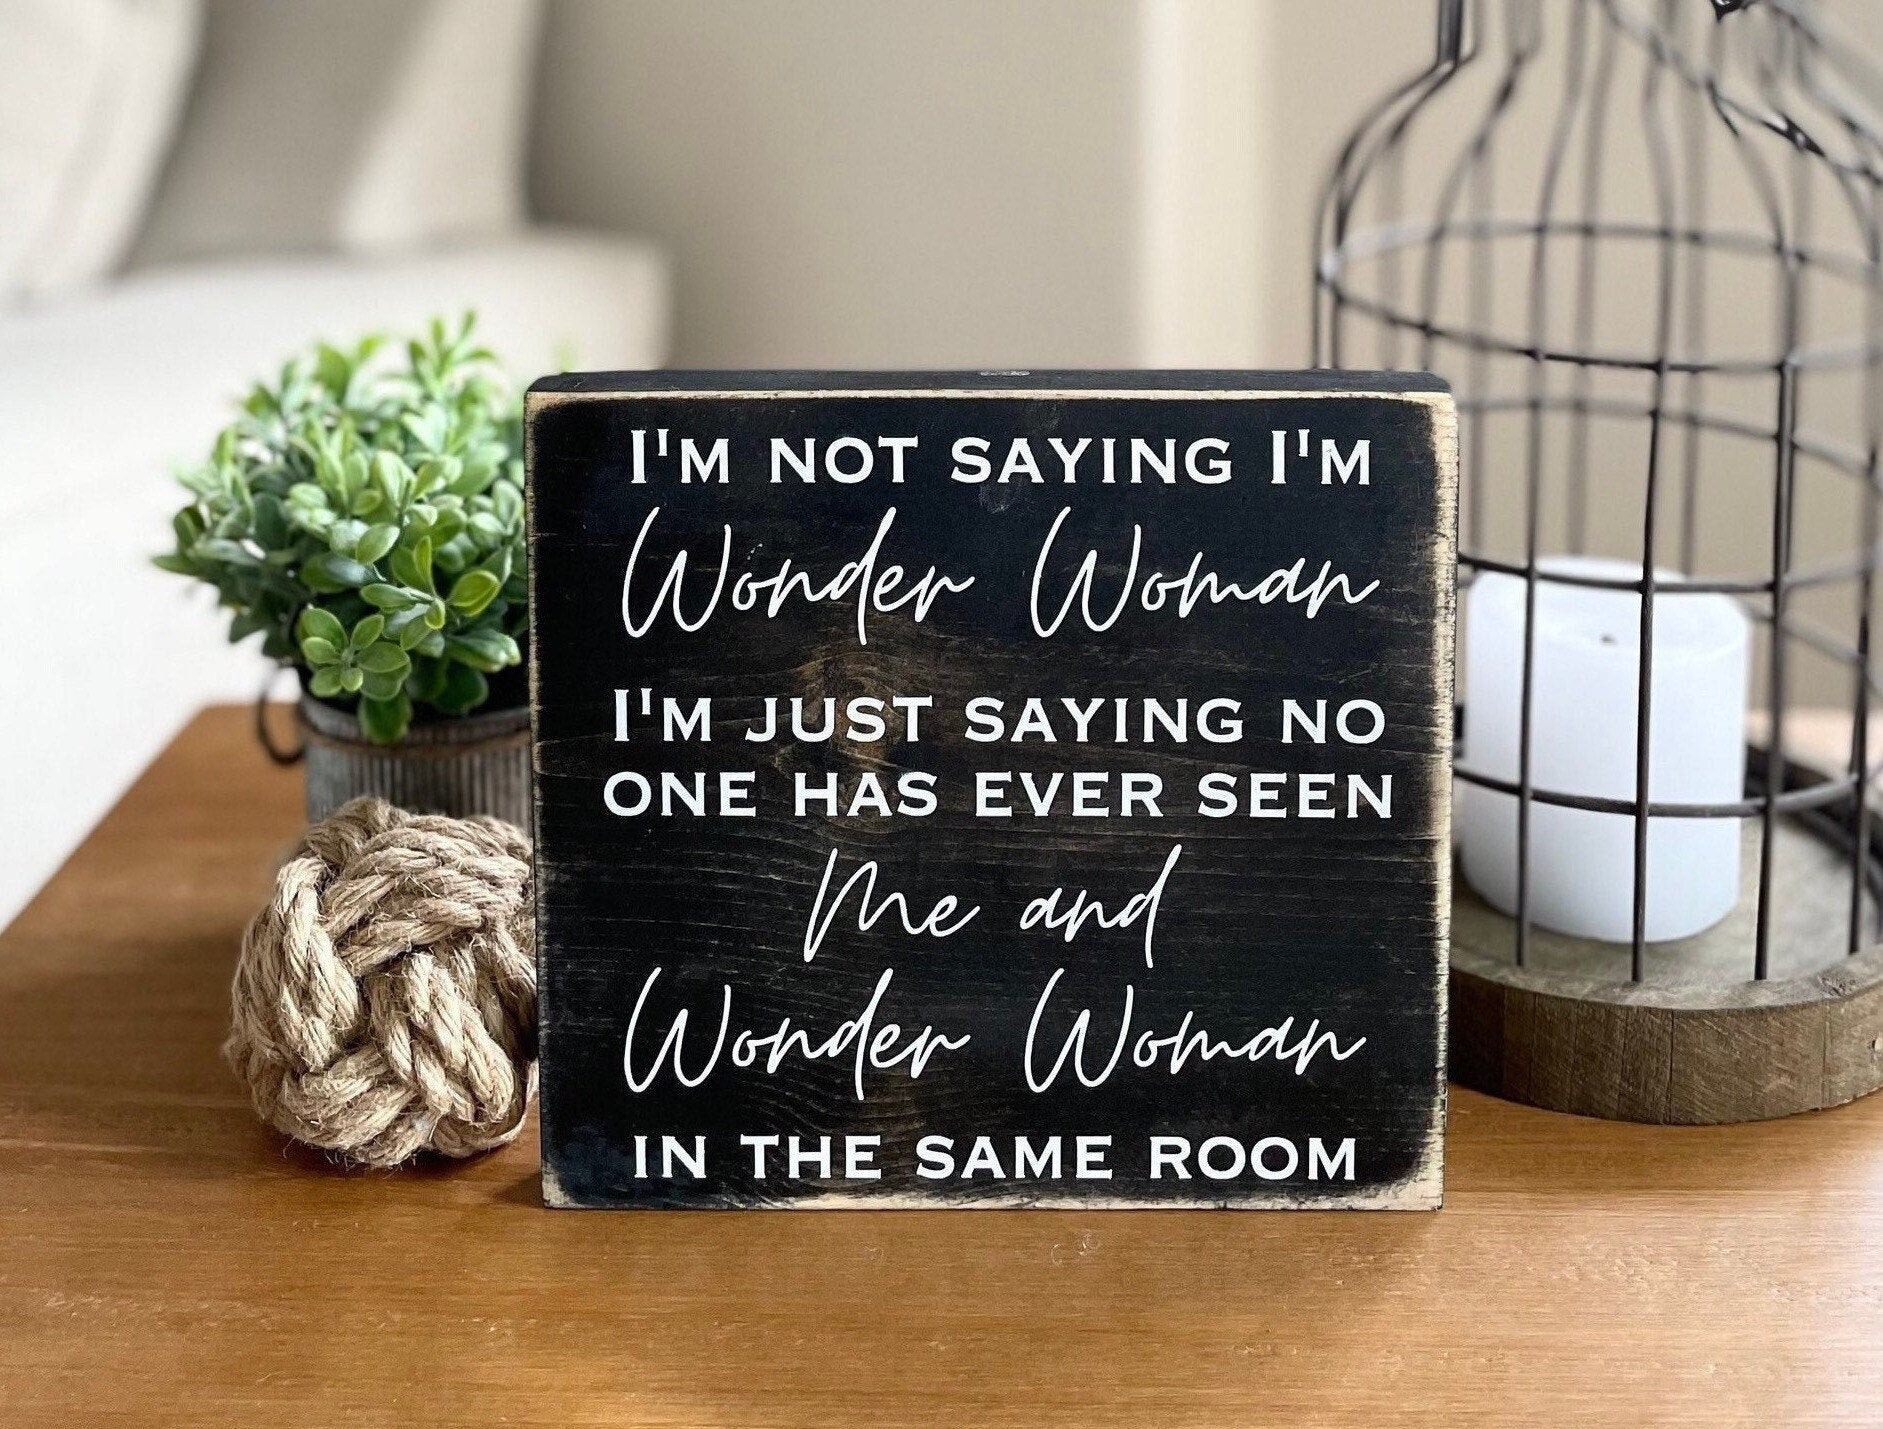 medium sized square wood sign stained black with white lettering that reads, " I'm not saying I'm Wonder Woman, I'm just saying no one has ever seen me and Wonder Woman in the same room". All text is in all caps except for "Wonder Woman" and "Me and Wonder Woman". Text is centered, takes up the entire area and is on 7 lines. Glossy finish.